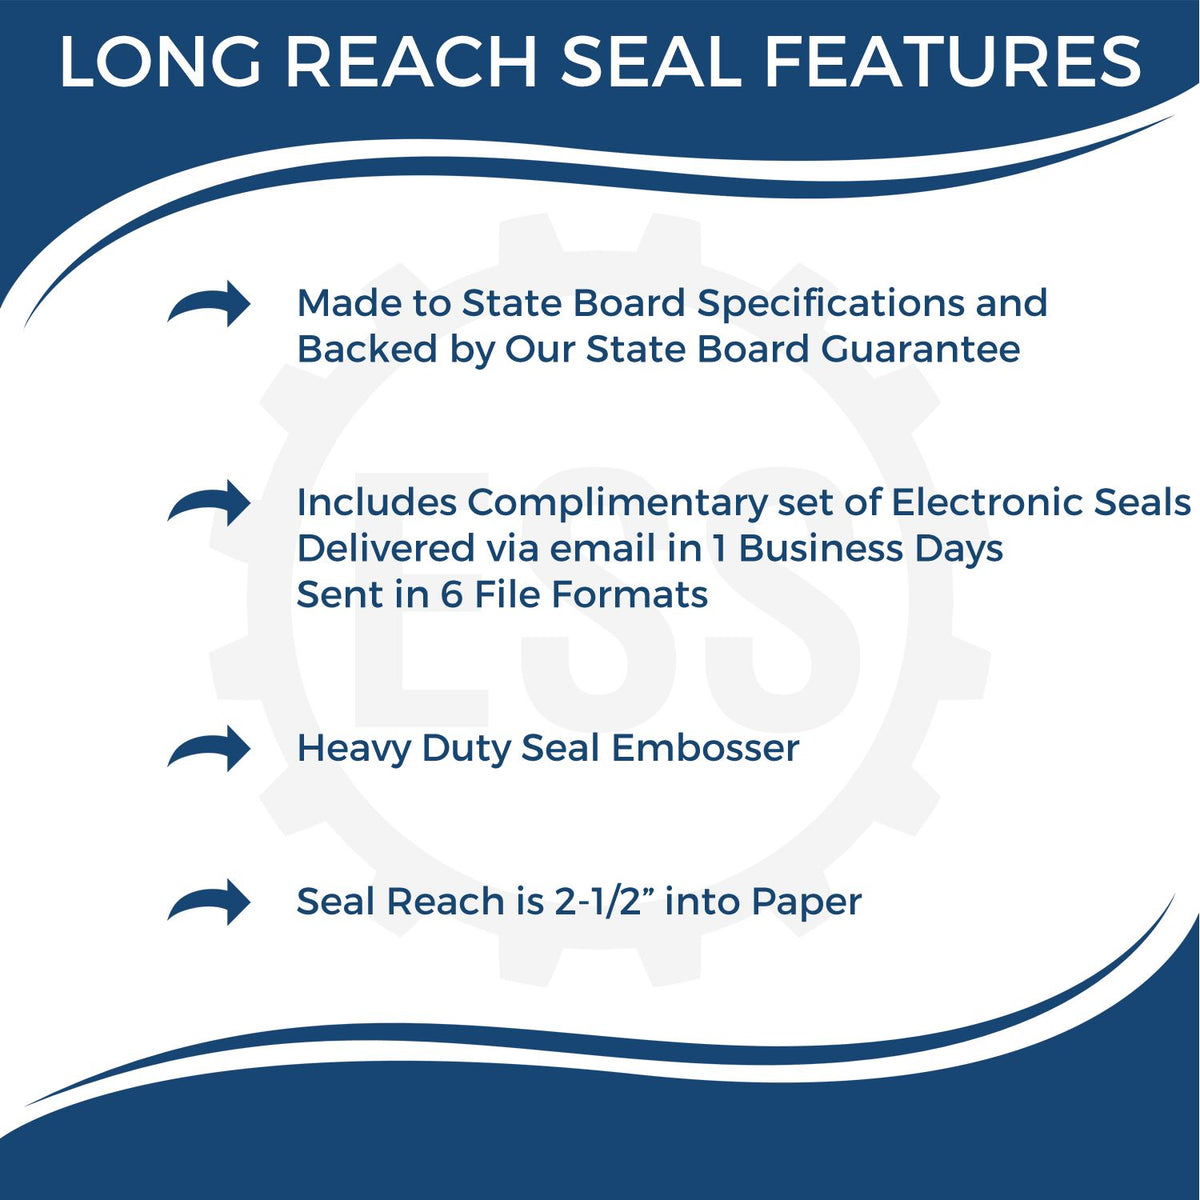 A picture of an infographic highlighting the selling points for the Long Reach Utah Geology Seal